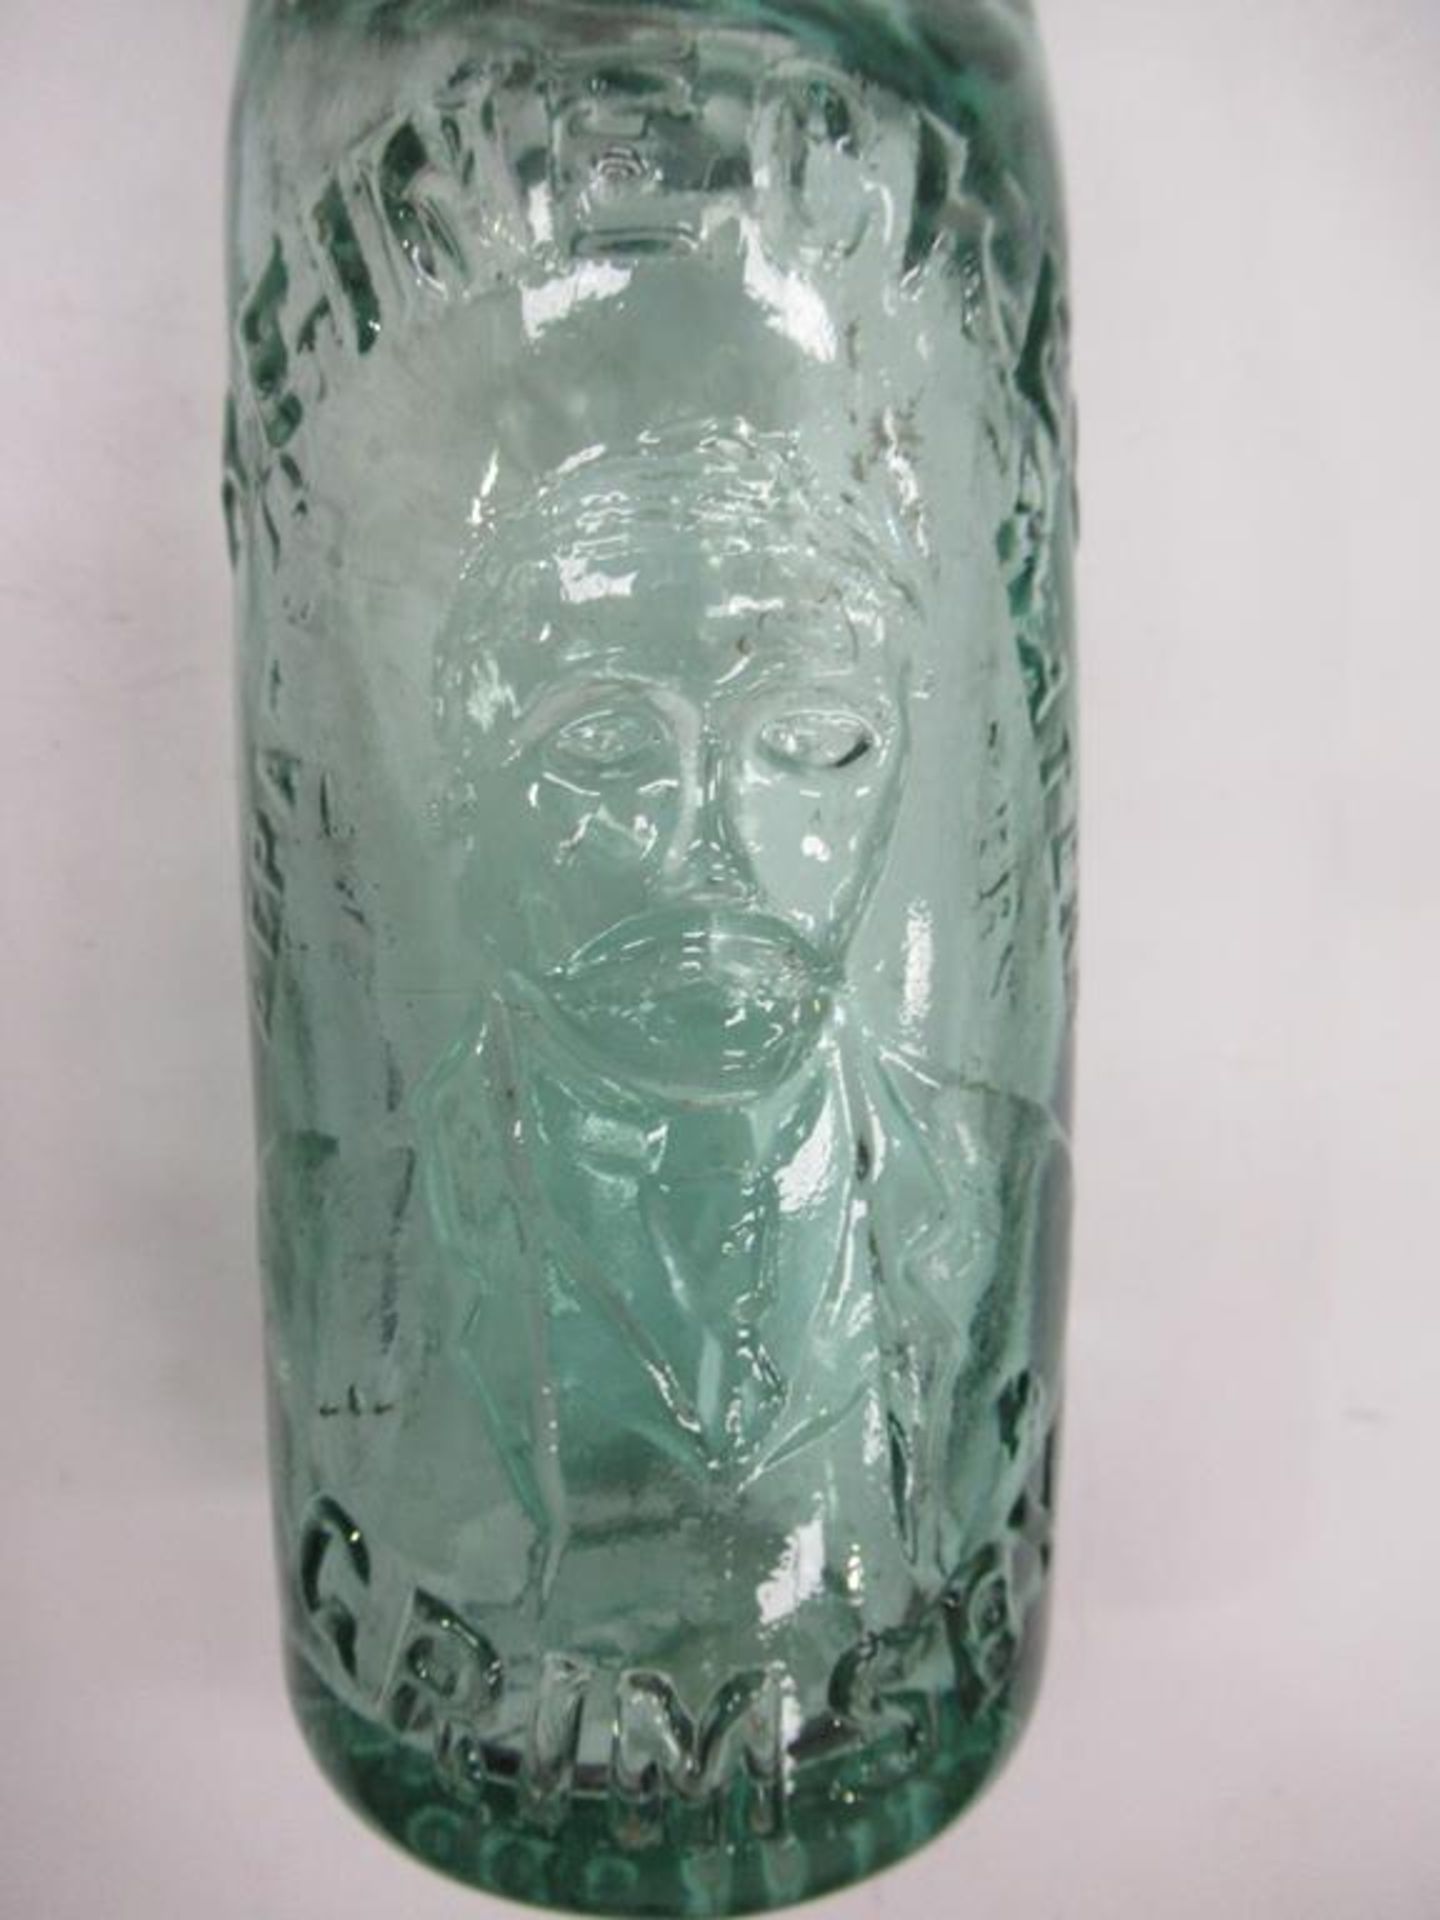 Grimsby Reinecke's Aerated Waters codd bottle with coloured marble 10oz - Image 6 of 9